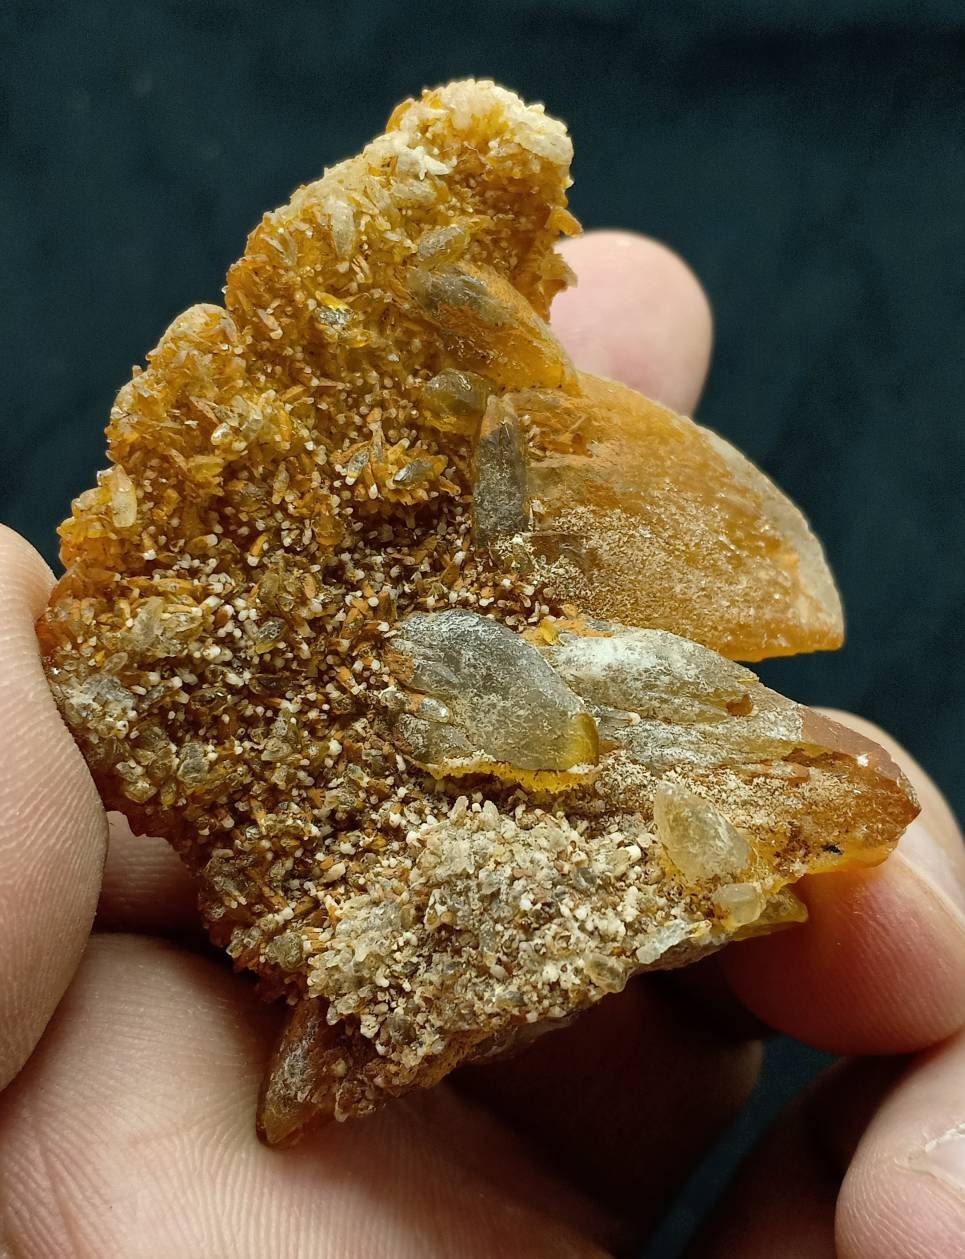 Calcite crystal on Fluorite matrix with Barite 66 grams